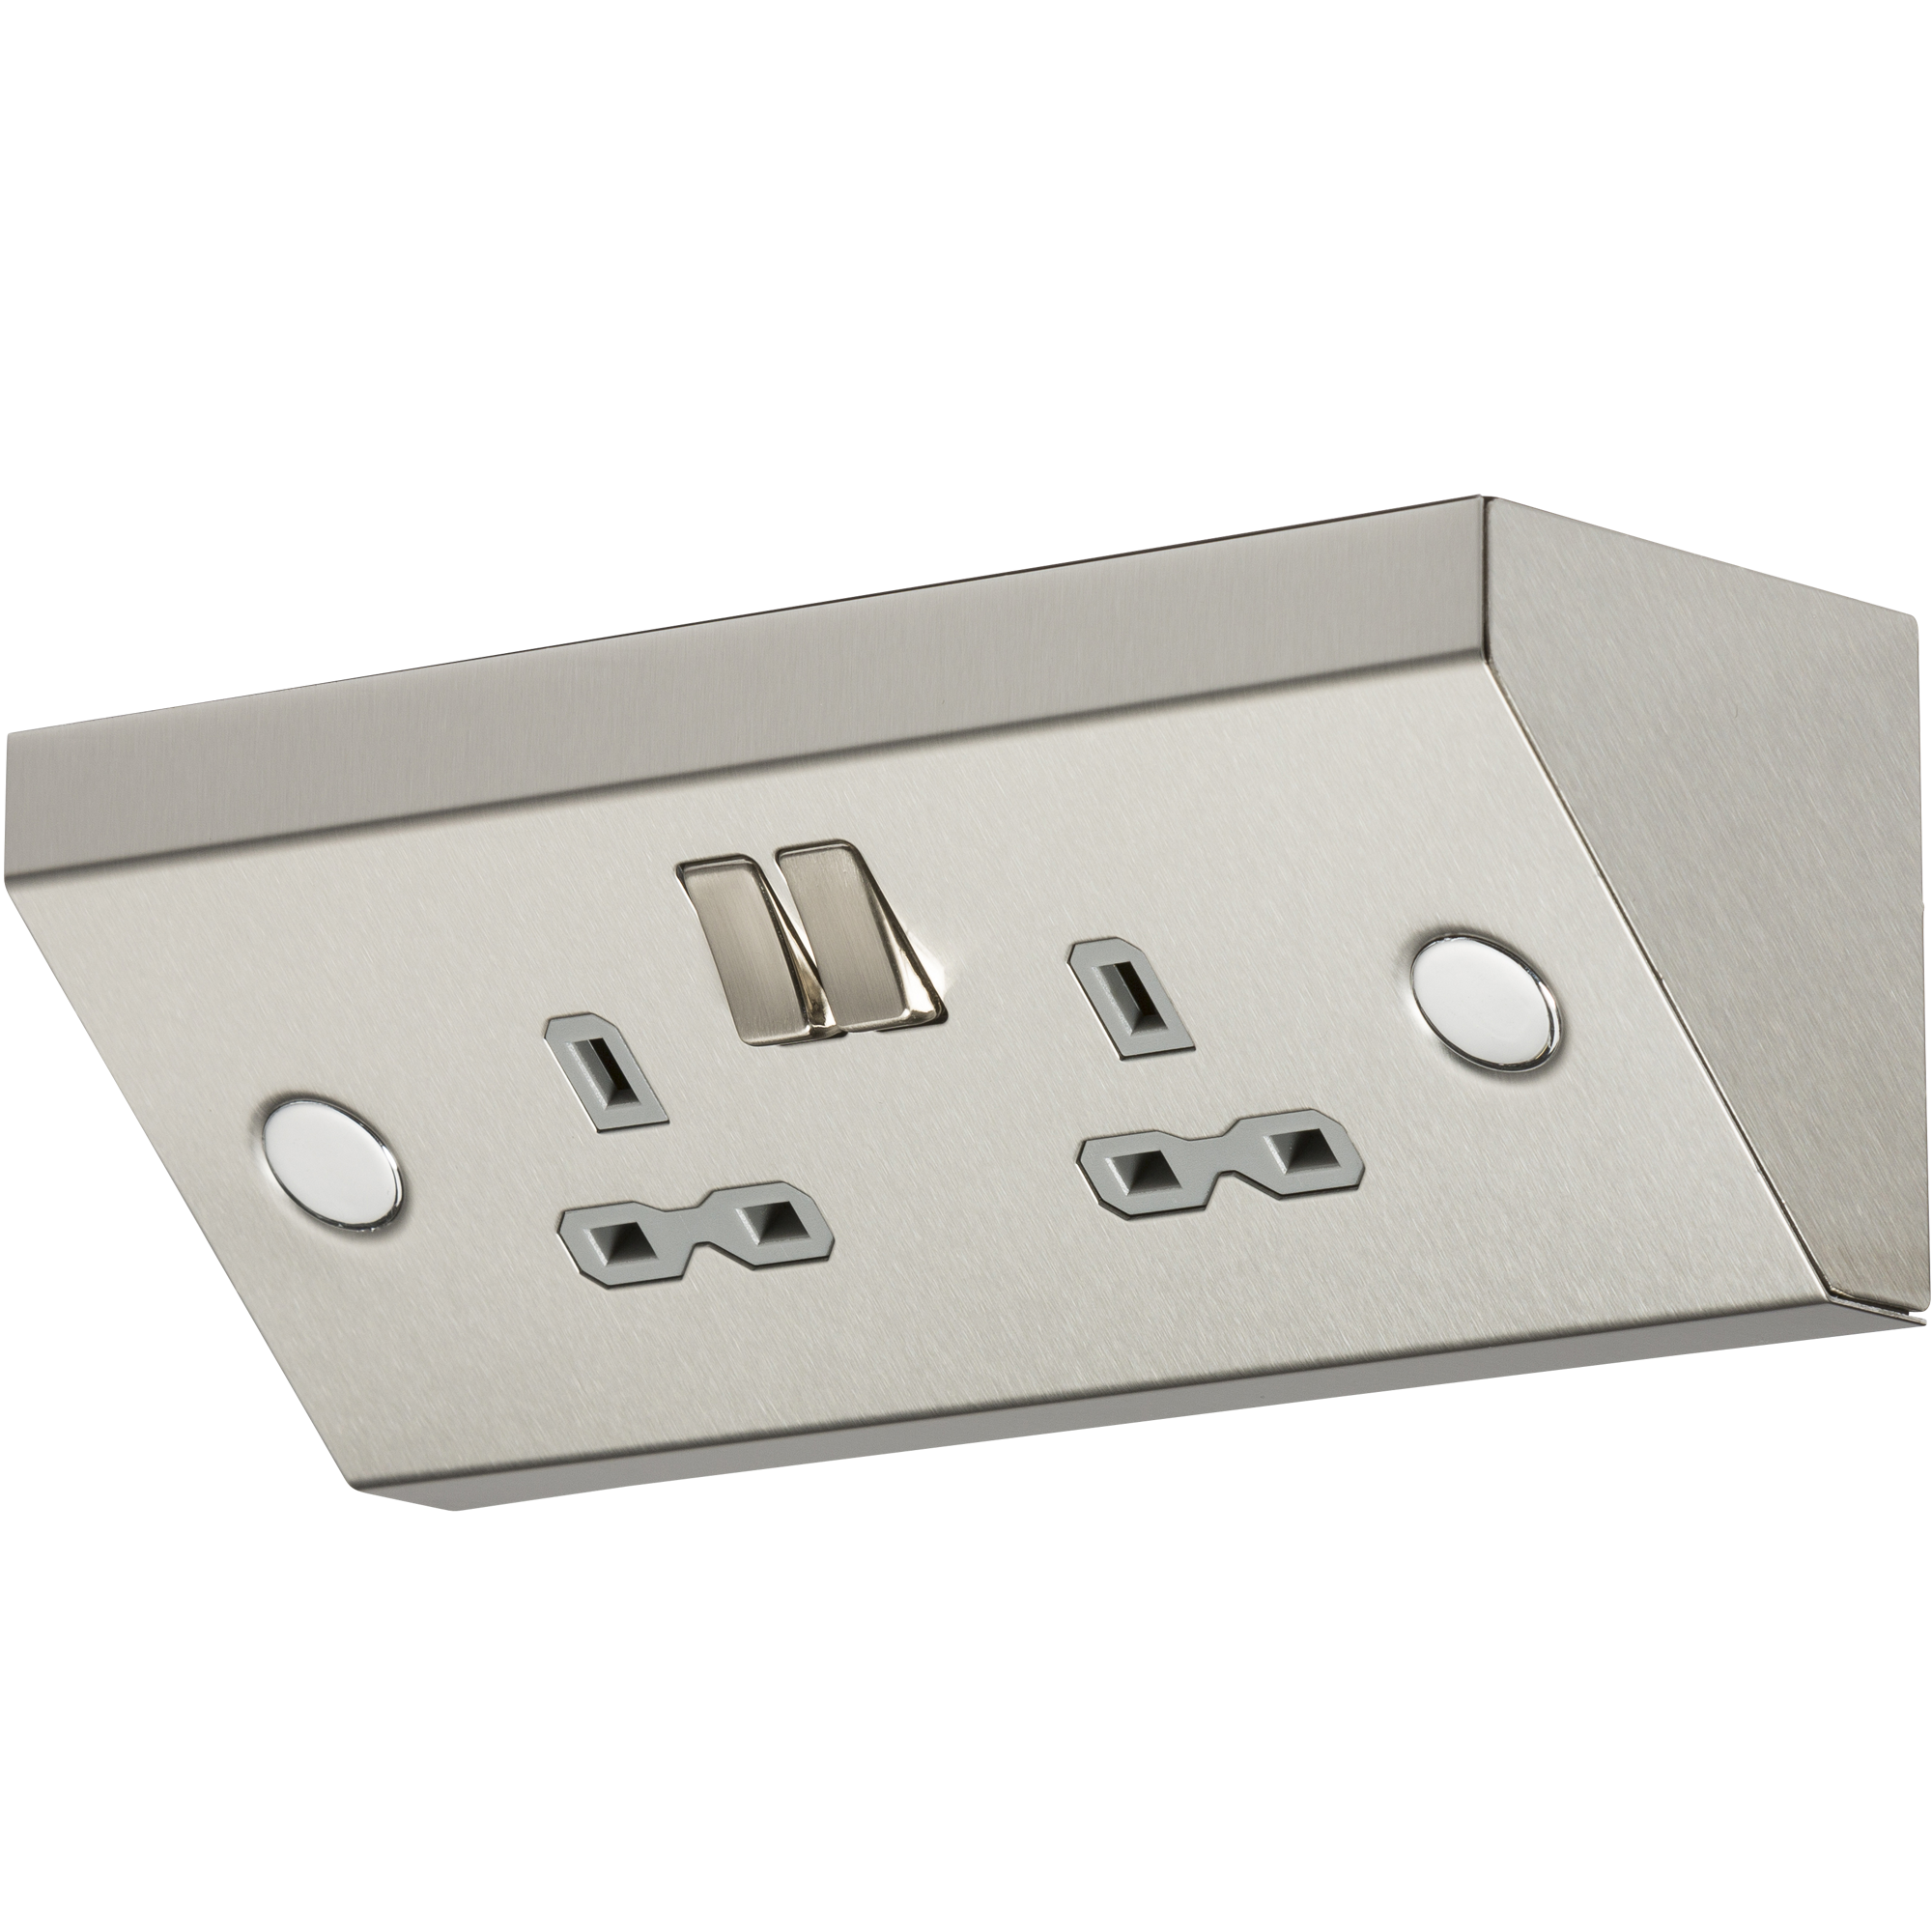 13A 2G Mounting DP Switched Socket - Stainless Steel With Grey Insert - SKR008 